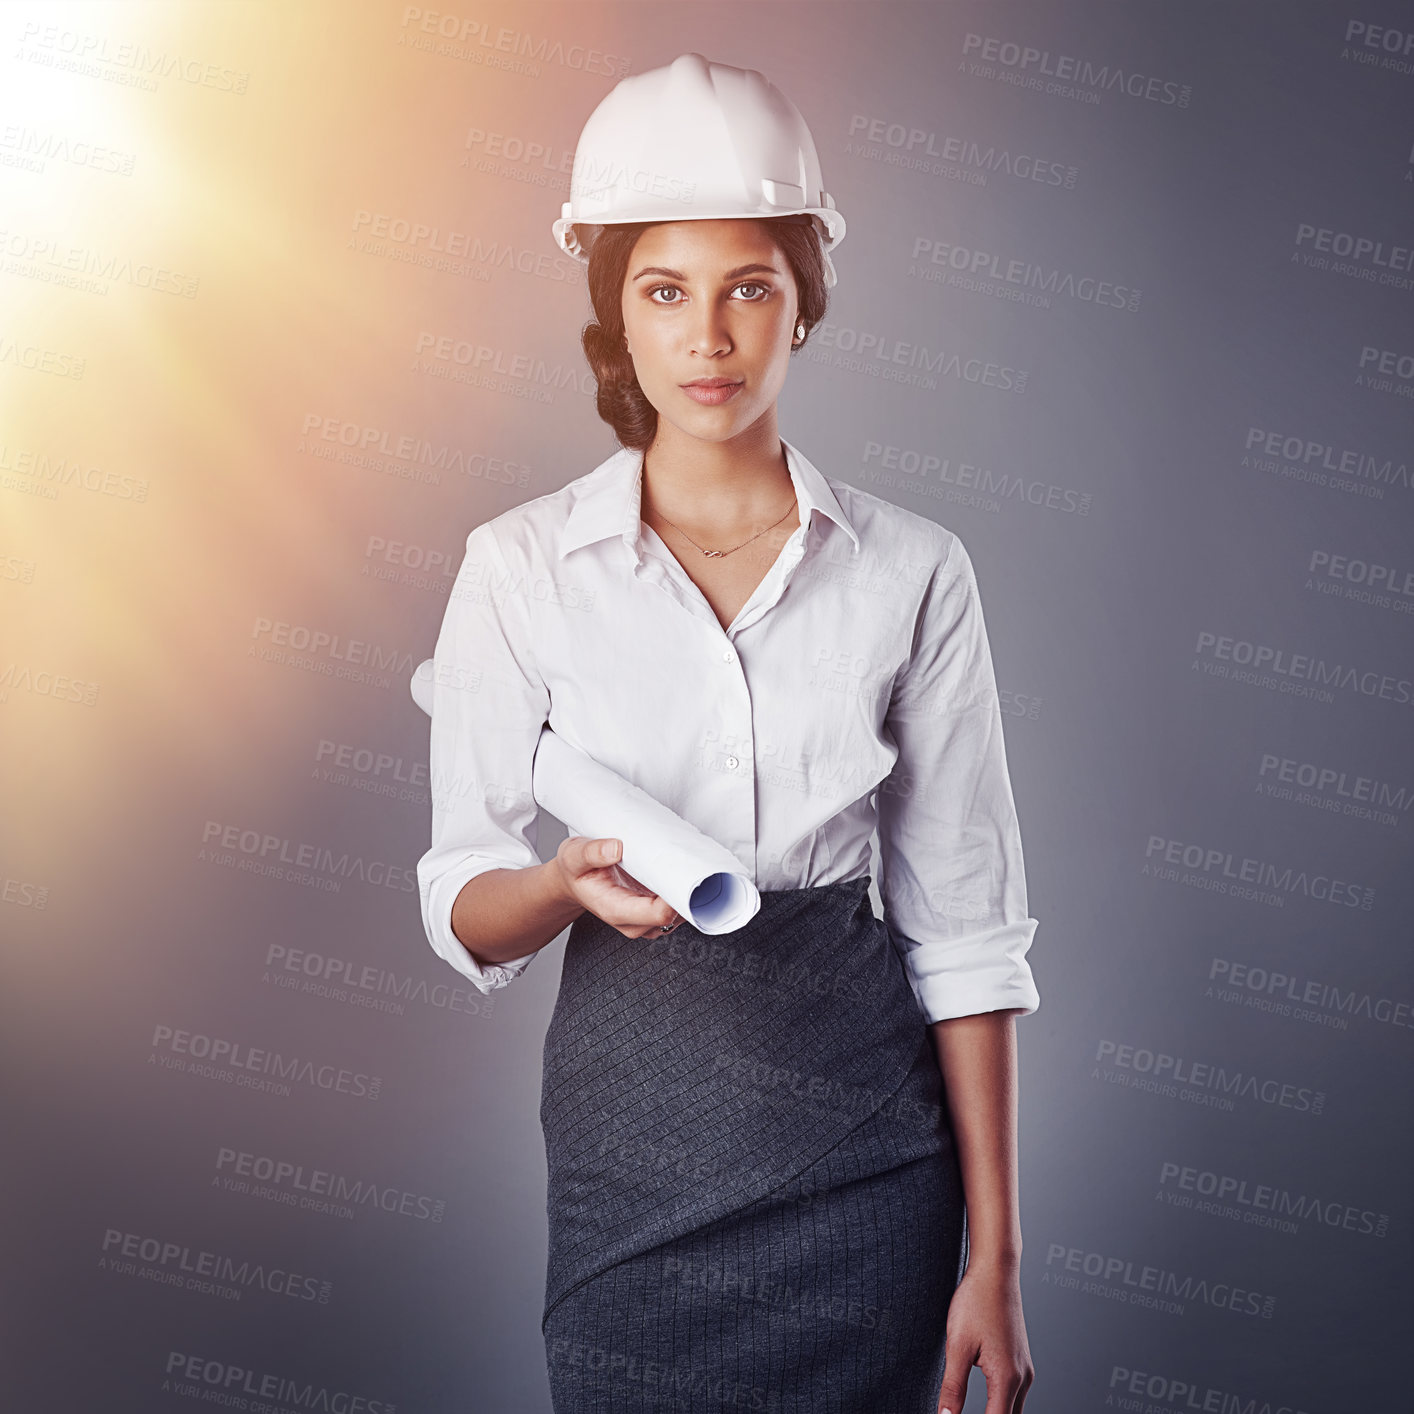 Buy stock photo Portrait of a well-dressed civil engineer posing while holding blueprints in the studio